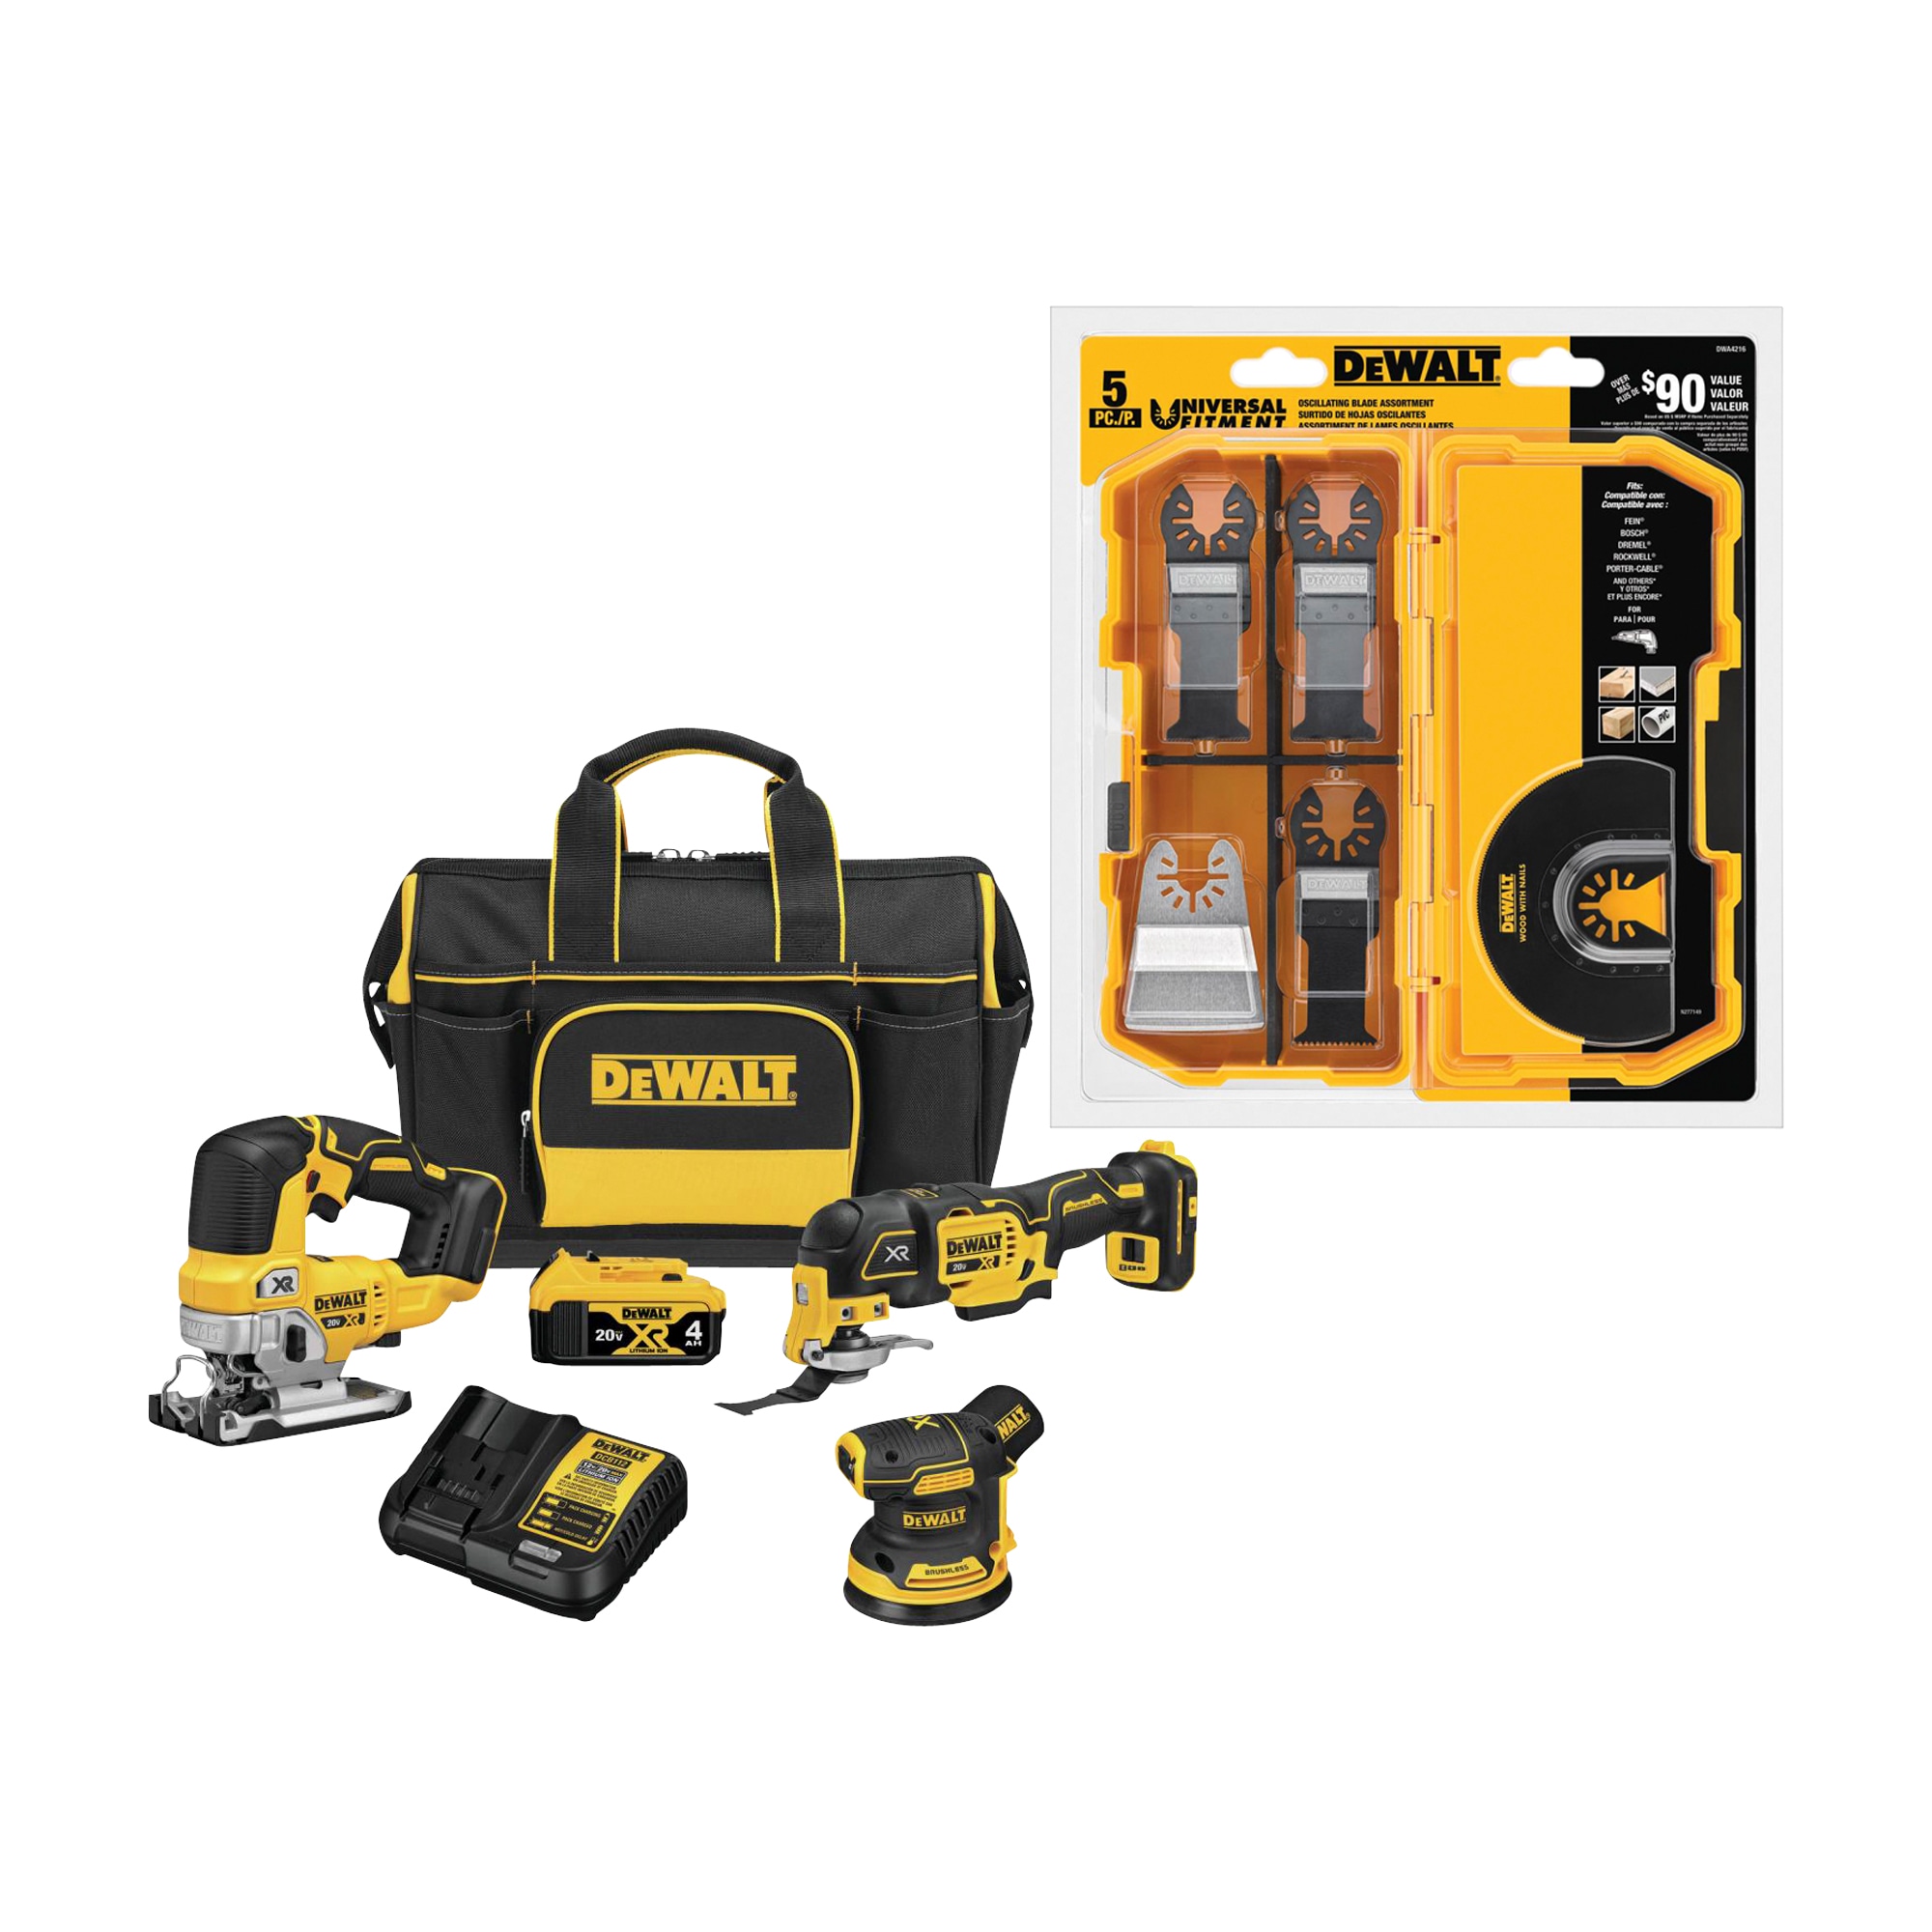 DEWALT XR 3-Tool 20-Volt Max Brushless Power Tool Combo Kit with Soft Case (1-Battery and charger Included) & 5-Piece Oscillating Blade Set